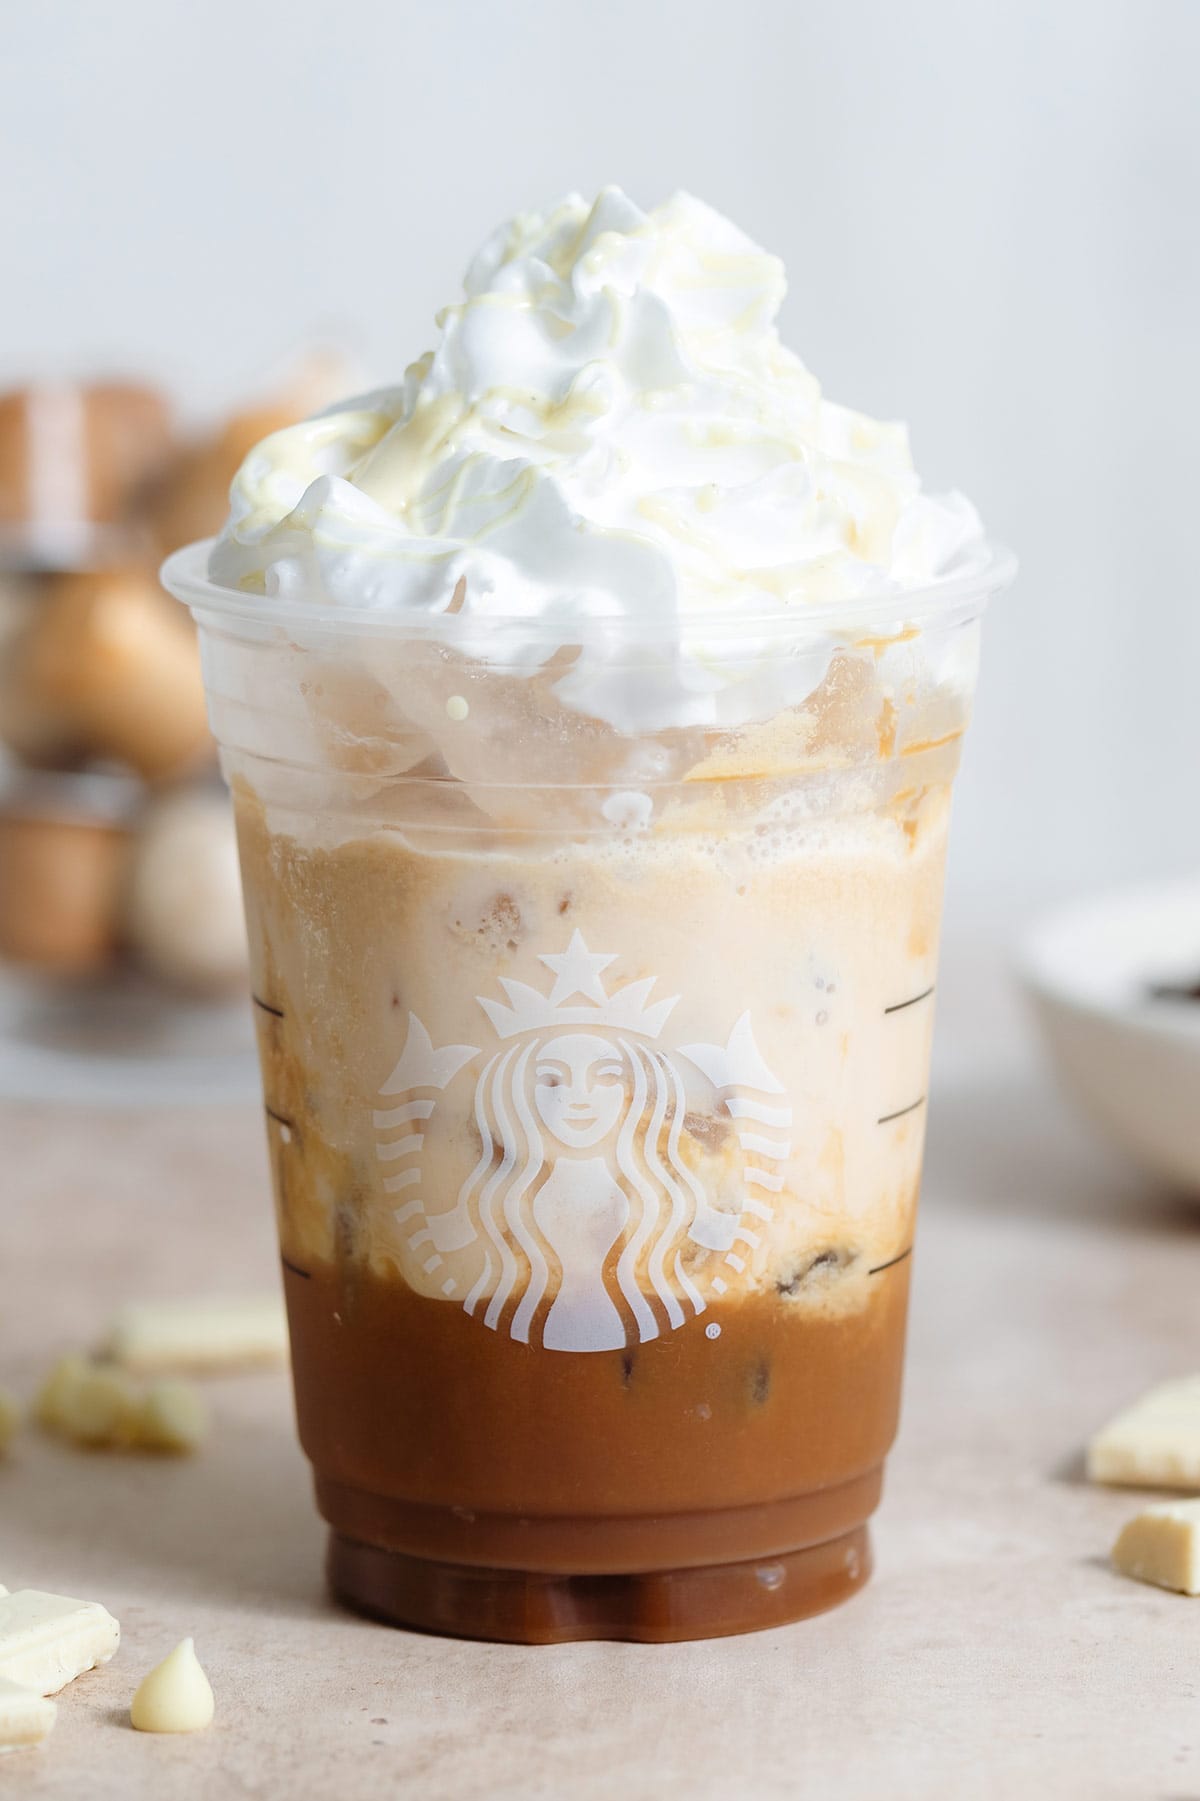 A plastic Starbucks cup with iced mocha over ice garnished with whipped cream and melted white chocolate.